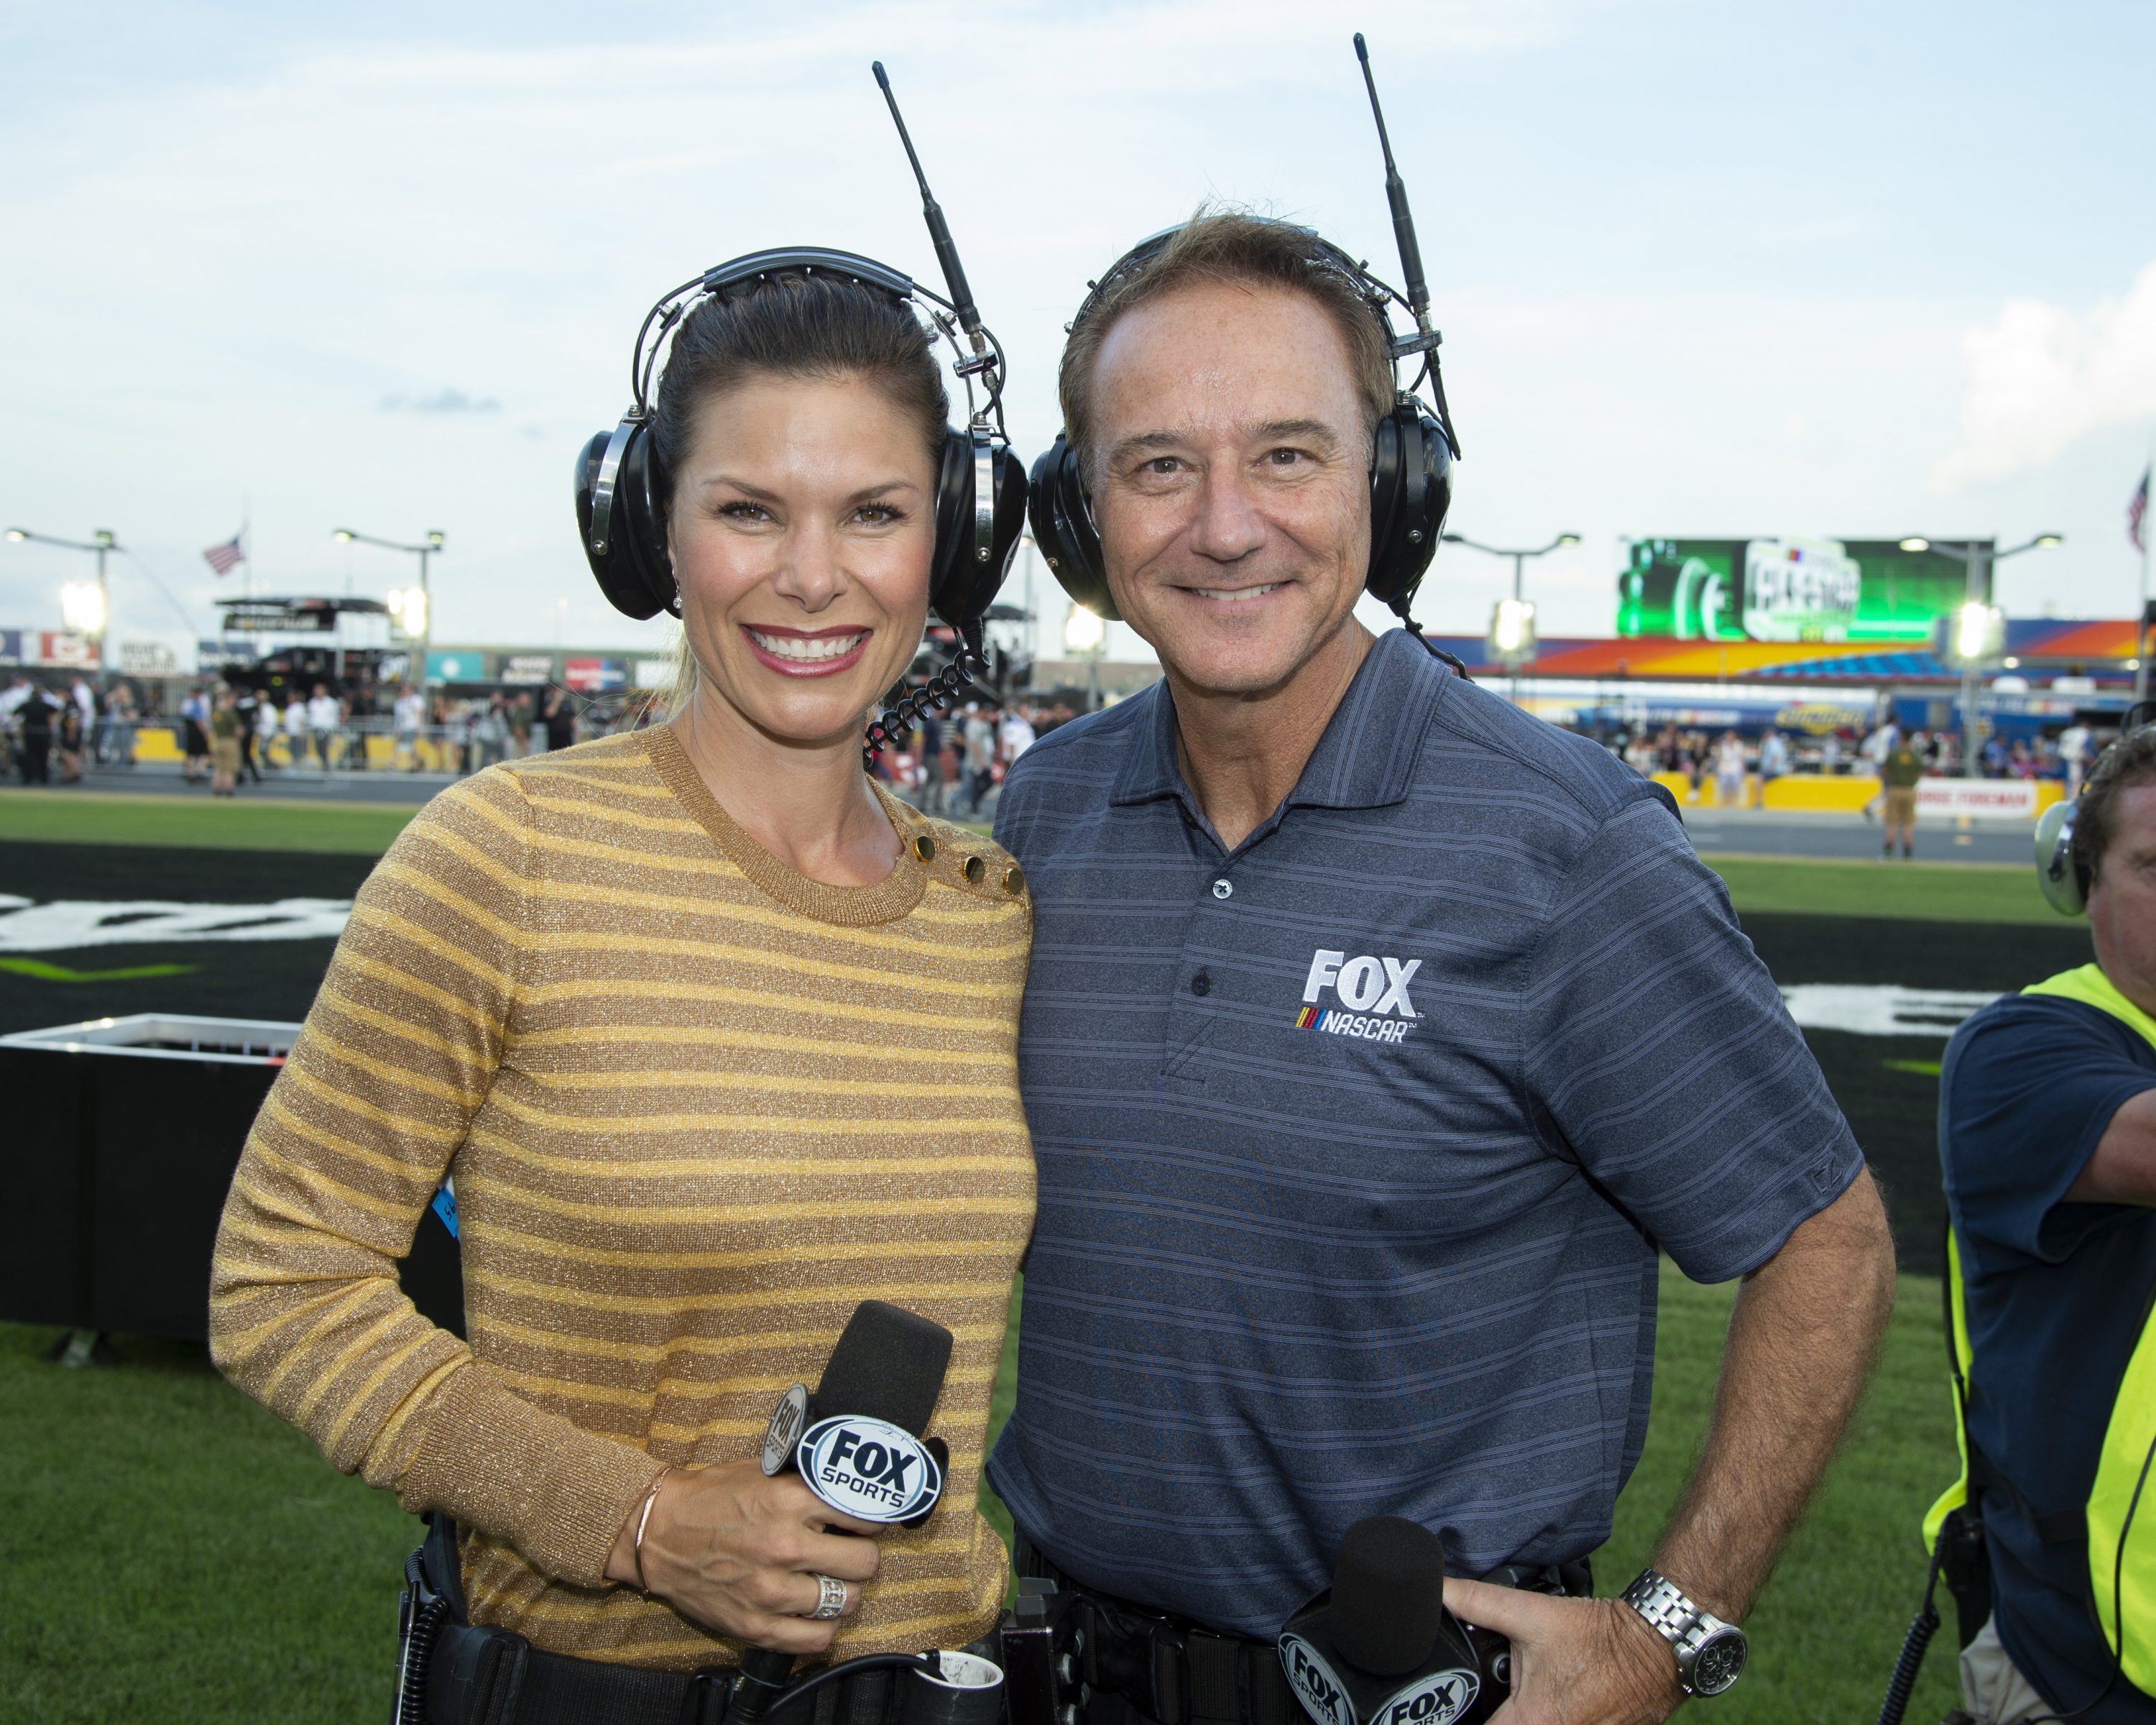 An in-depth look inside the world of being a Fox Sports NASCAR pit reporter